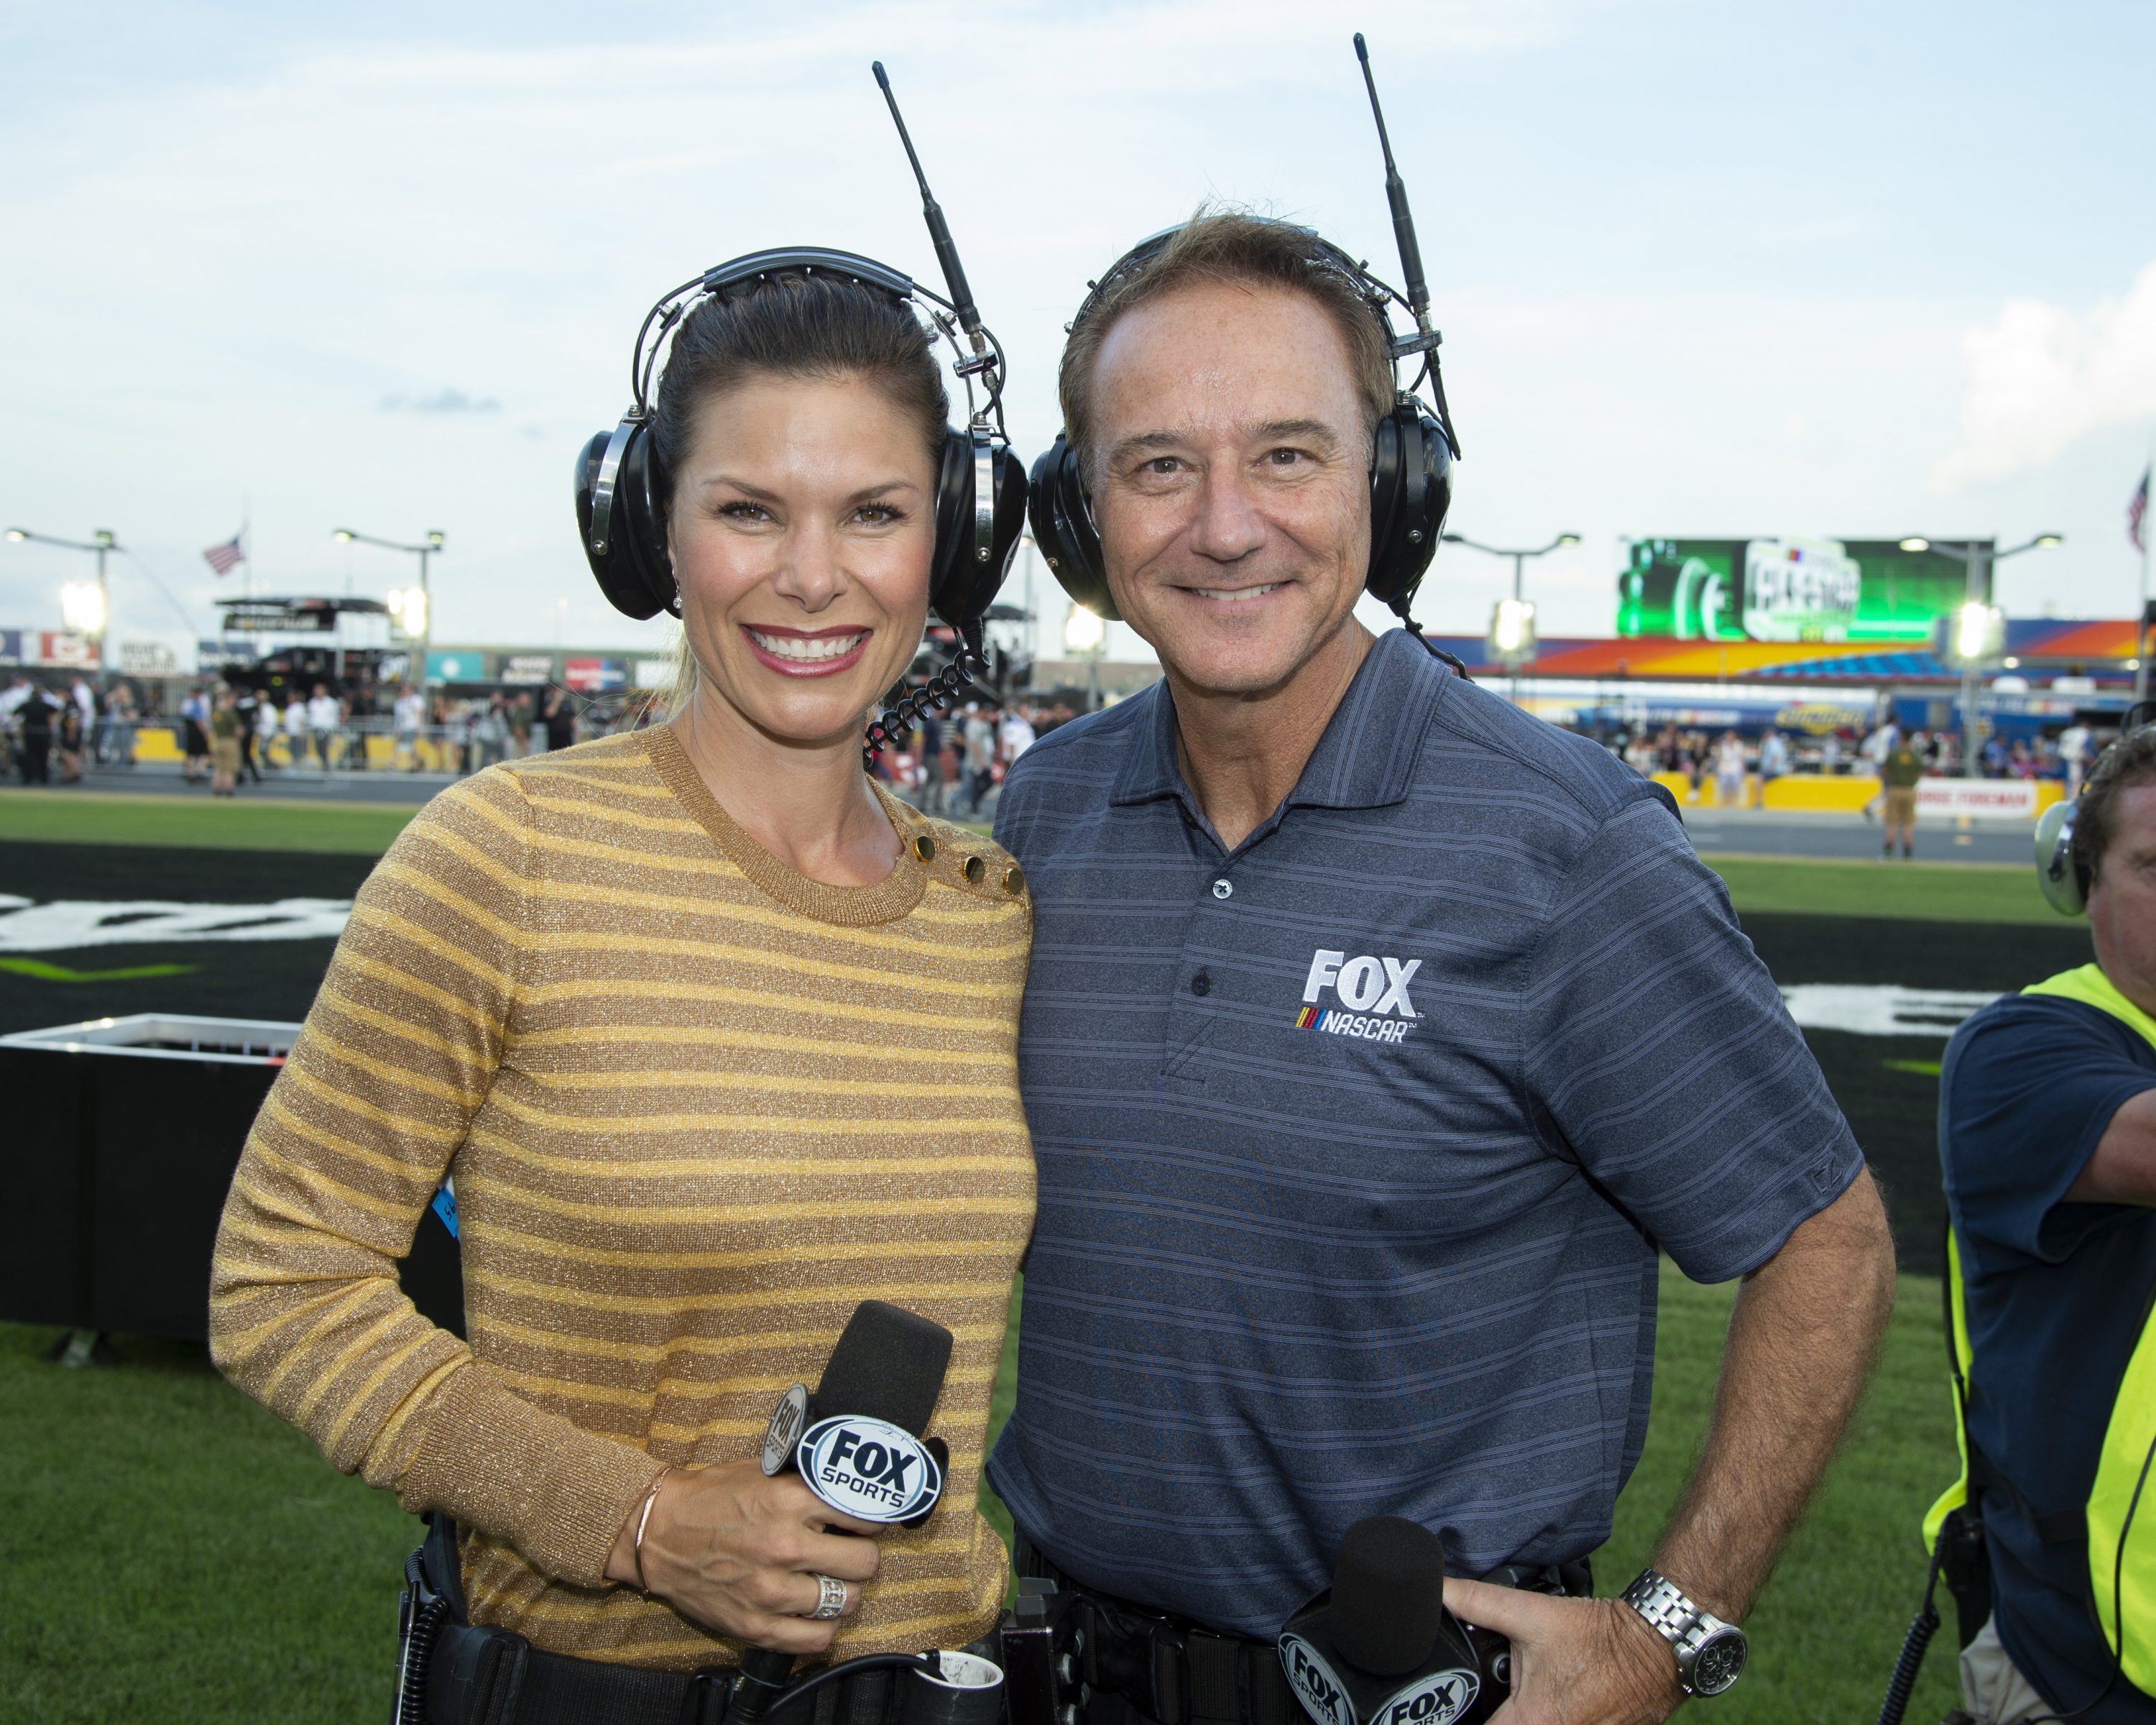 An in-depth look inside the world of being a Fox Sports NASCAR pit reporter